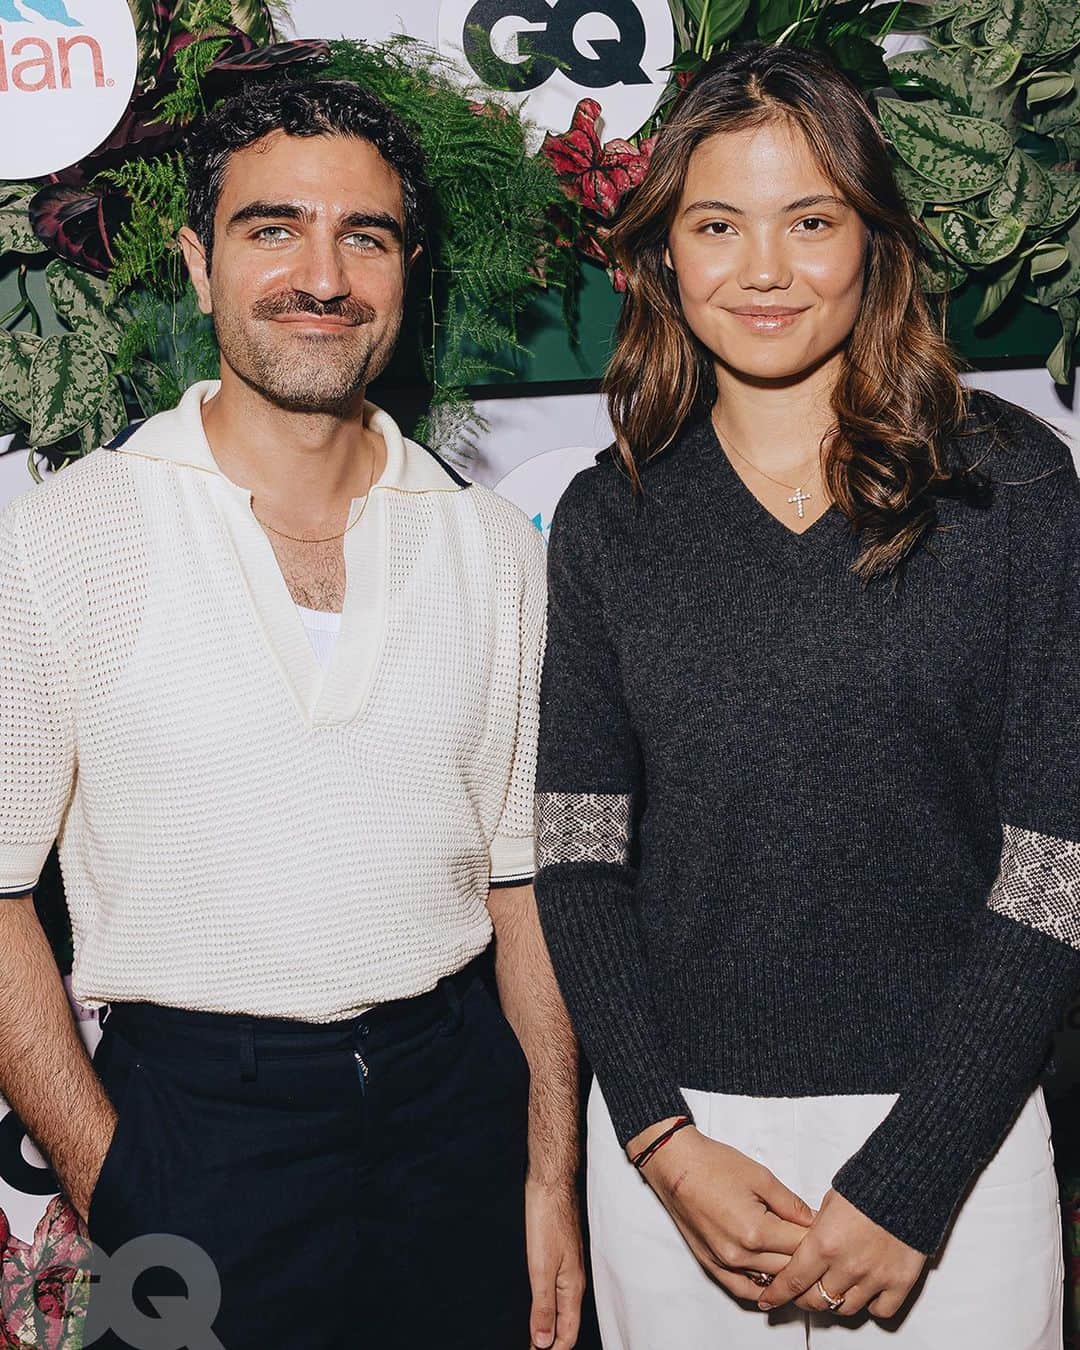 evianのインスタグラム：「Throwback to Monday when we held an exclusive lunch in partnership with @britishgq to celebrate The Championships, @wimbledon bringing together VIP guests form the worlds of entertainment, culture & sport.   Our Global Brand Ambassador @emmaraducanu and GQ's Deputy Global Editorial Director @adambaidawi rocked the co-hosting duties in the evian’s VIP suite at Wimbledon, turning the day into an absolute success 🎾✨  #evian #Wimbledon」